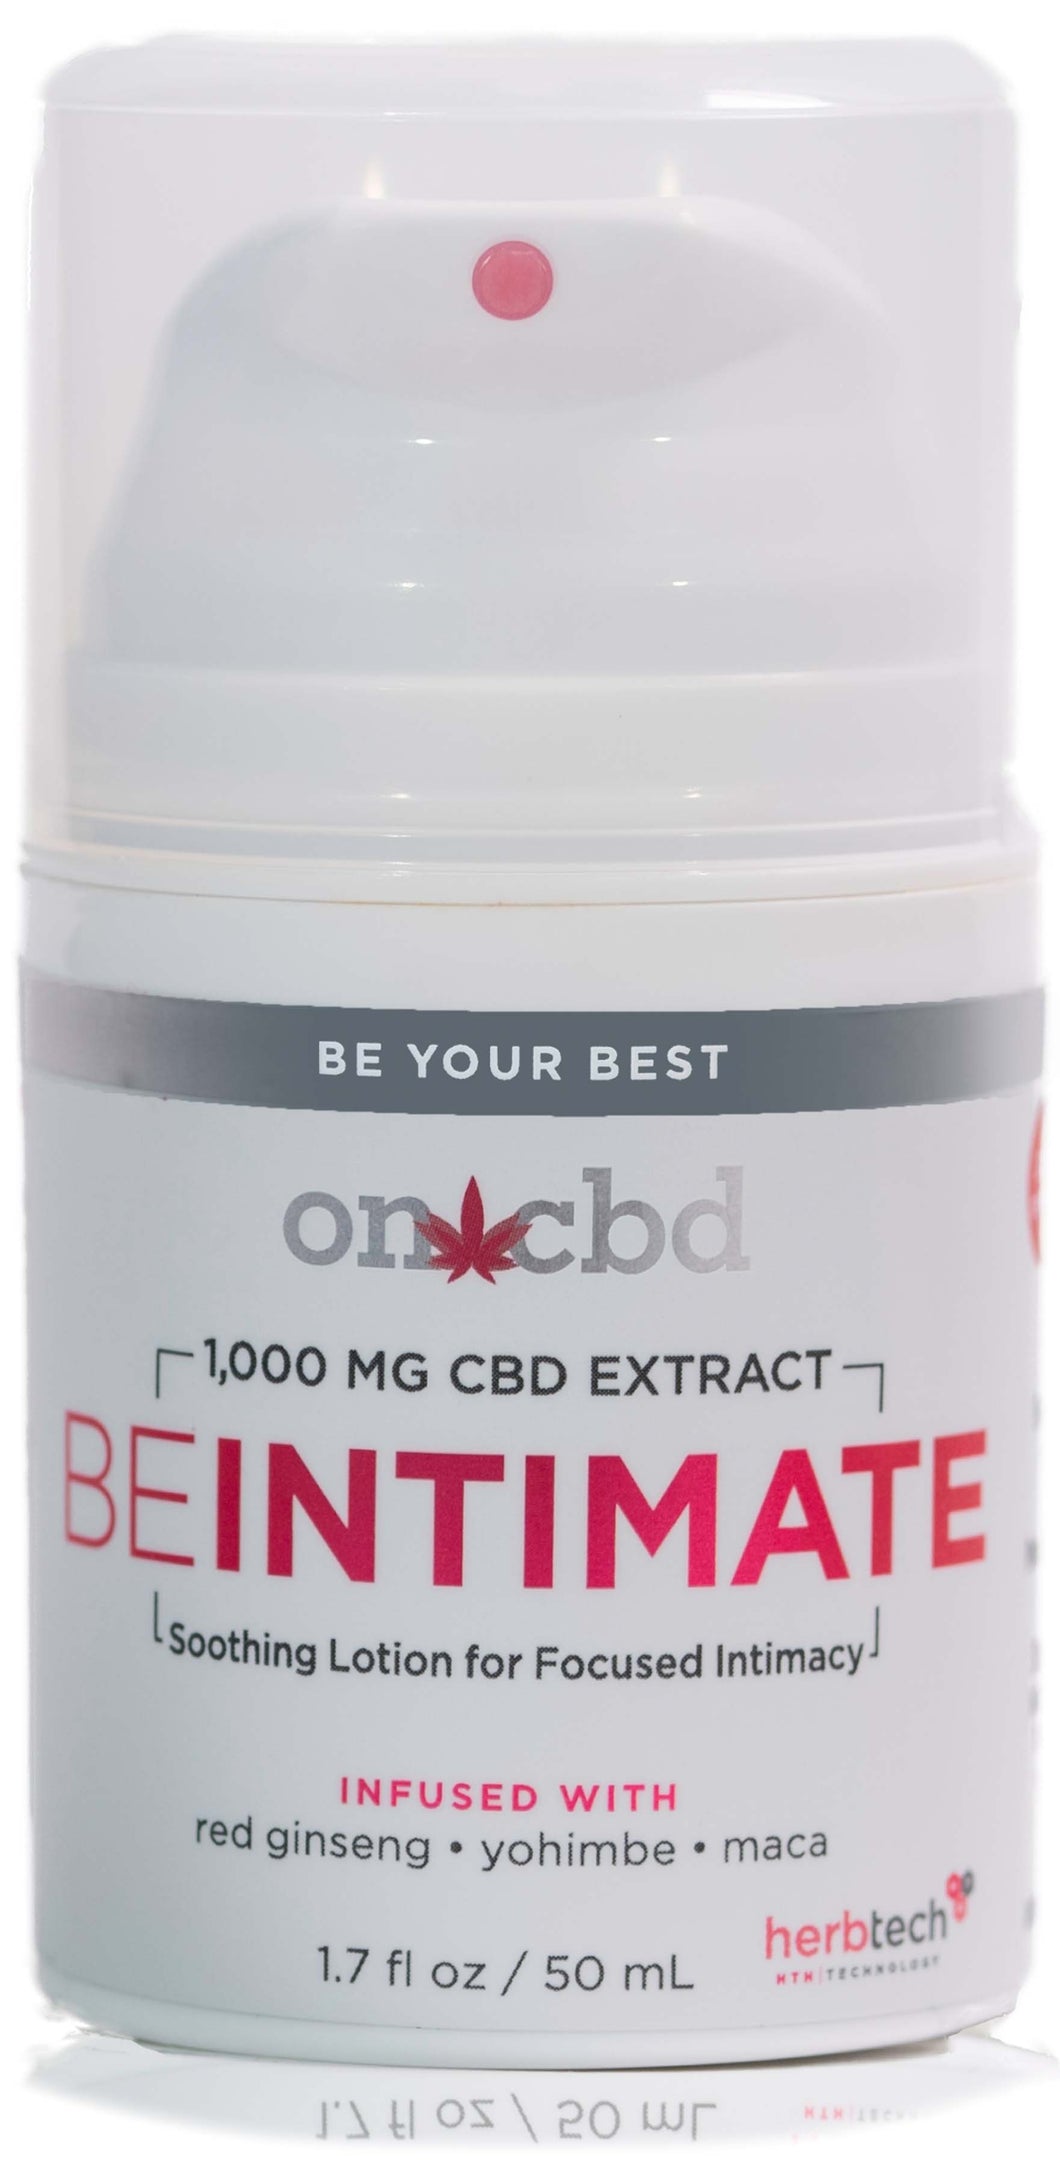 On CBD: Be Intimate Lotion(30% Discount Applied at Checkout)